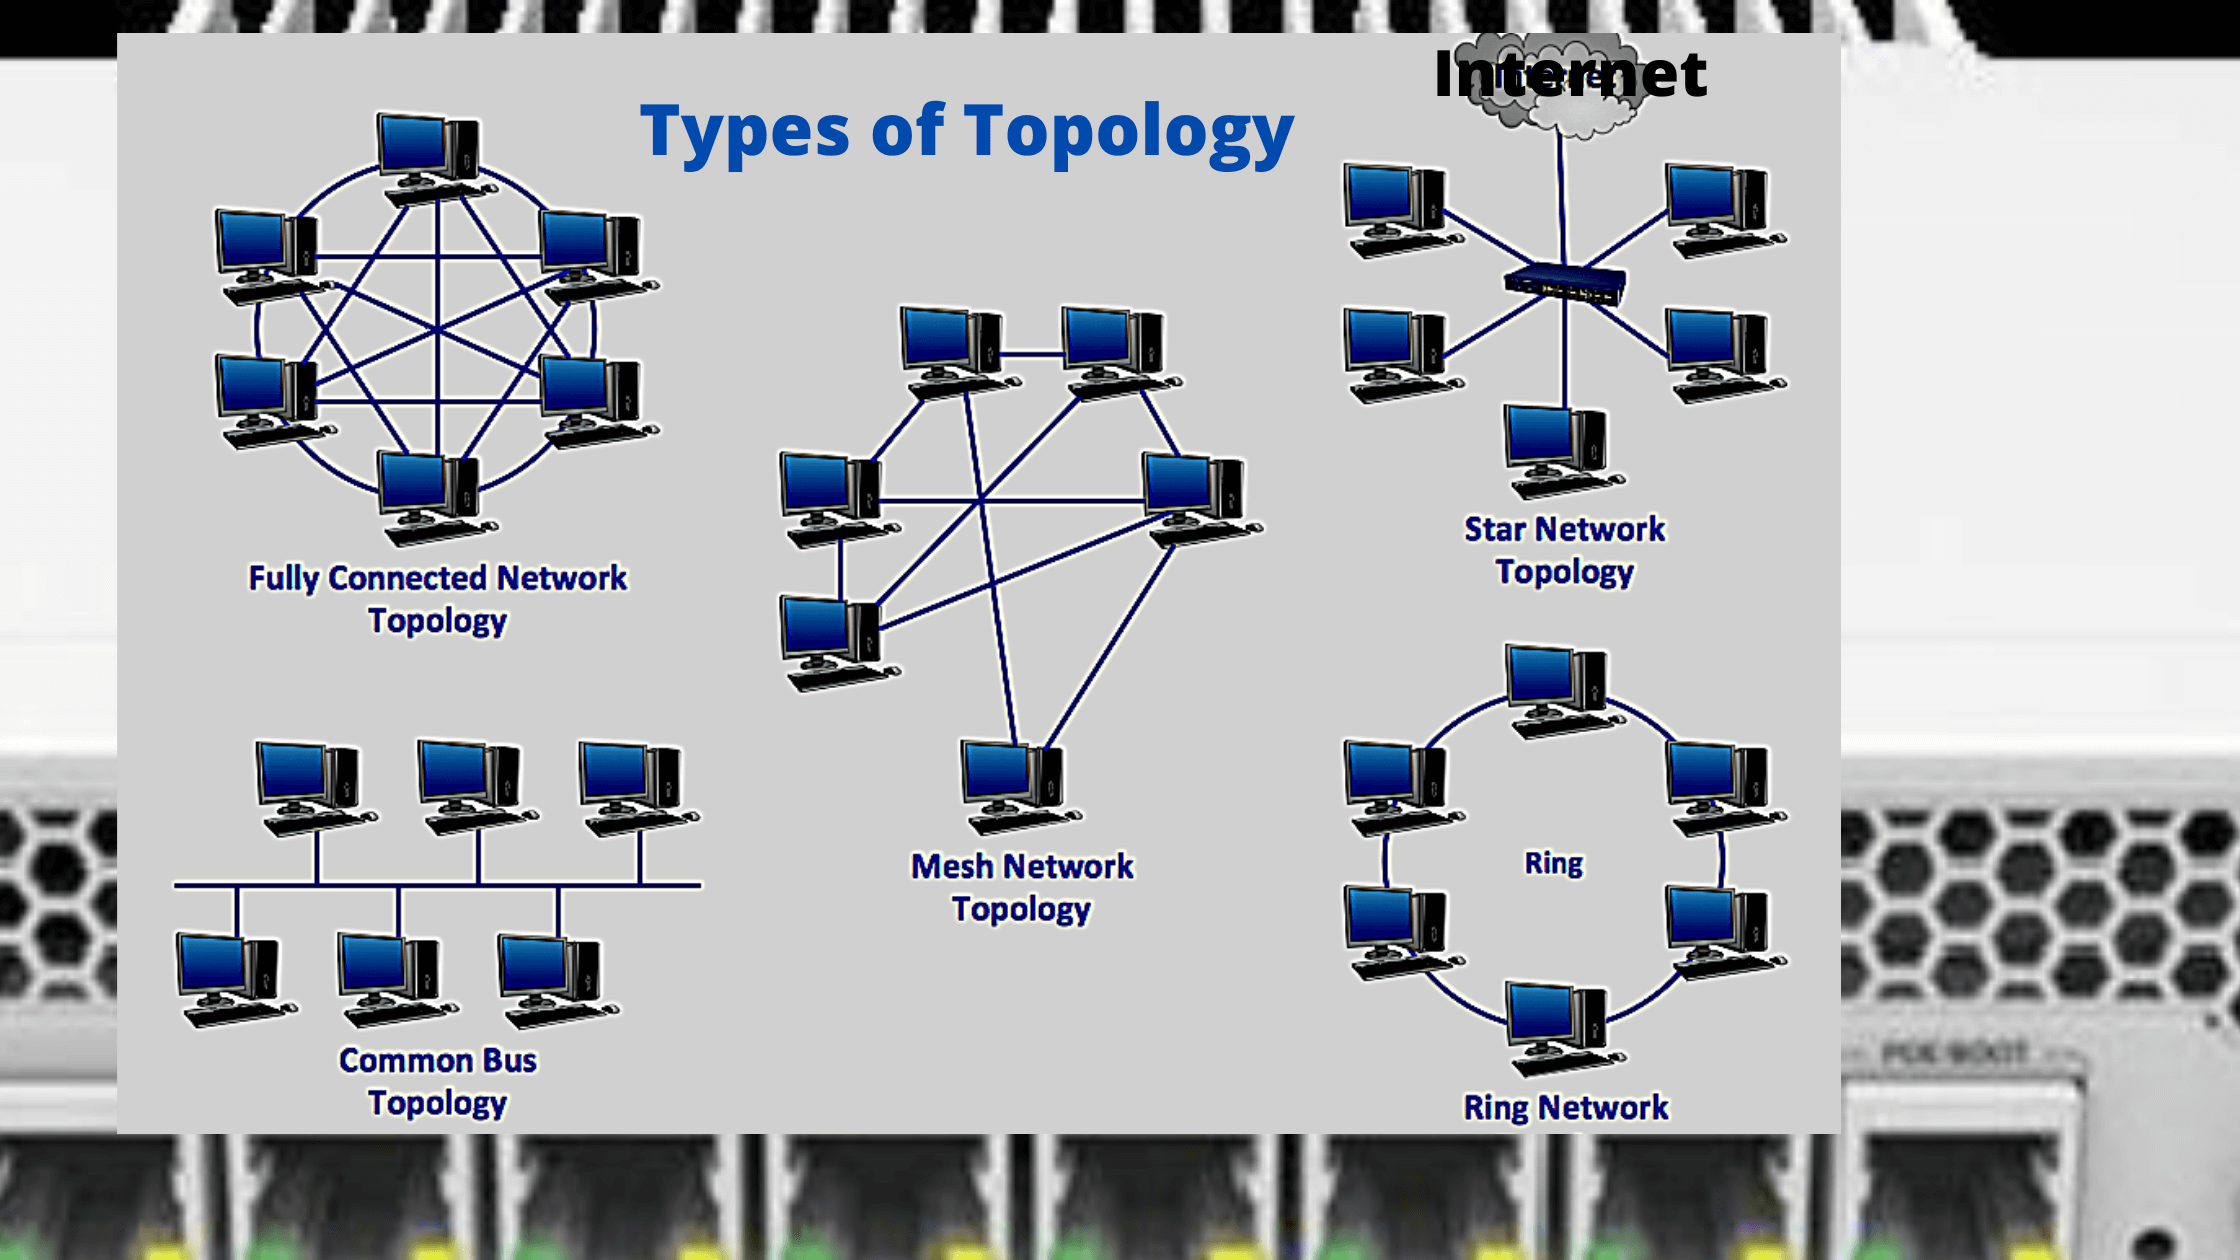 Types of Topology